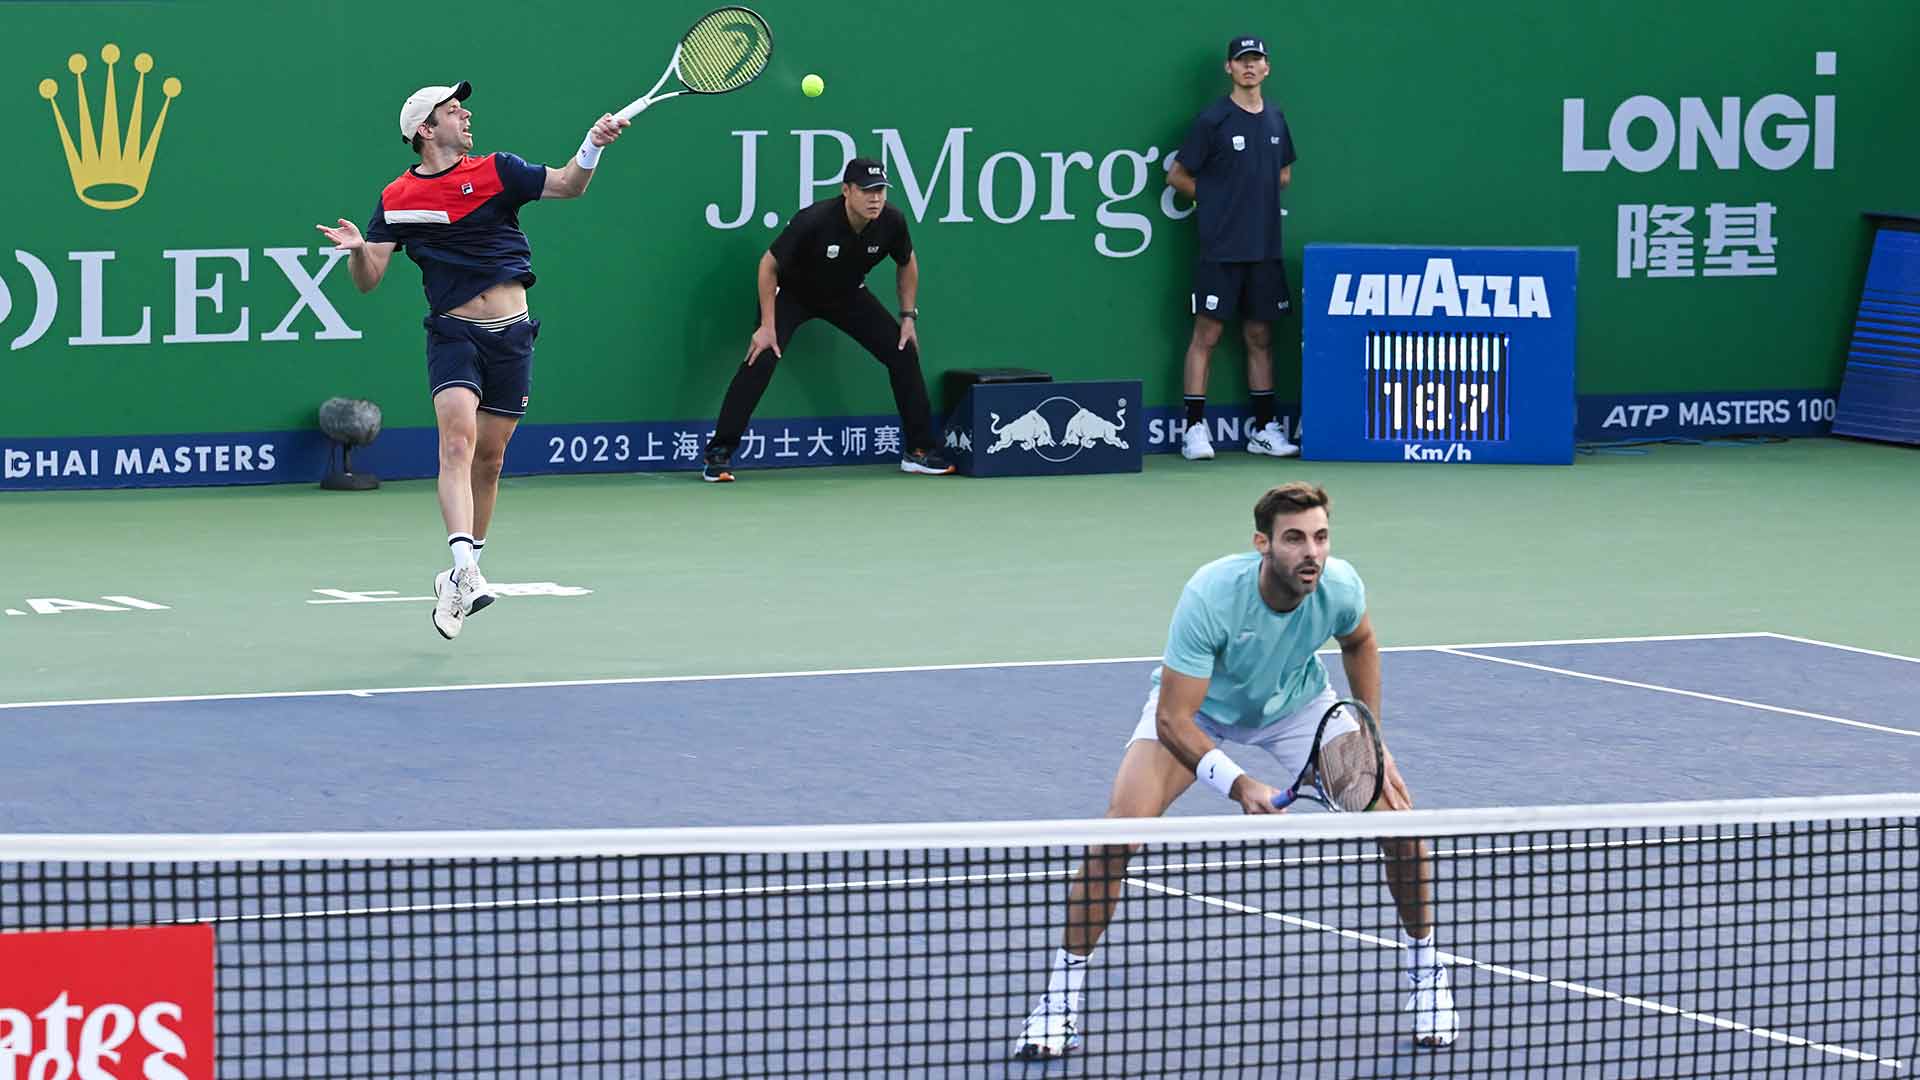 Horacio Zeballos and Marcel Granollers in quarter-final action on Wednesday in Shanghai.